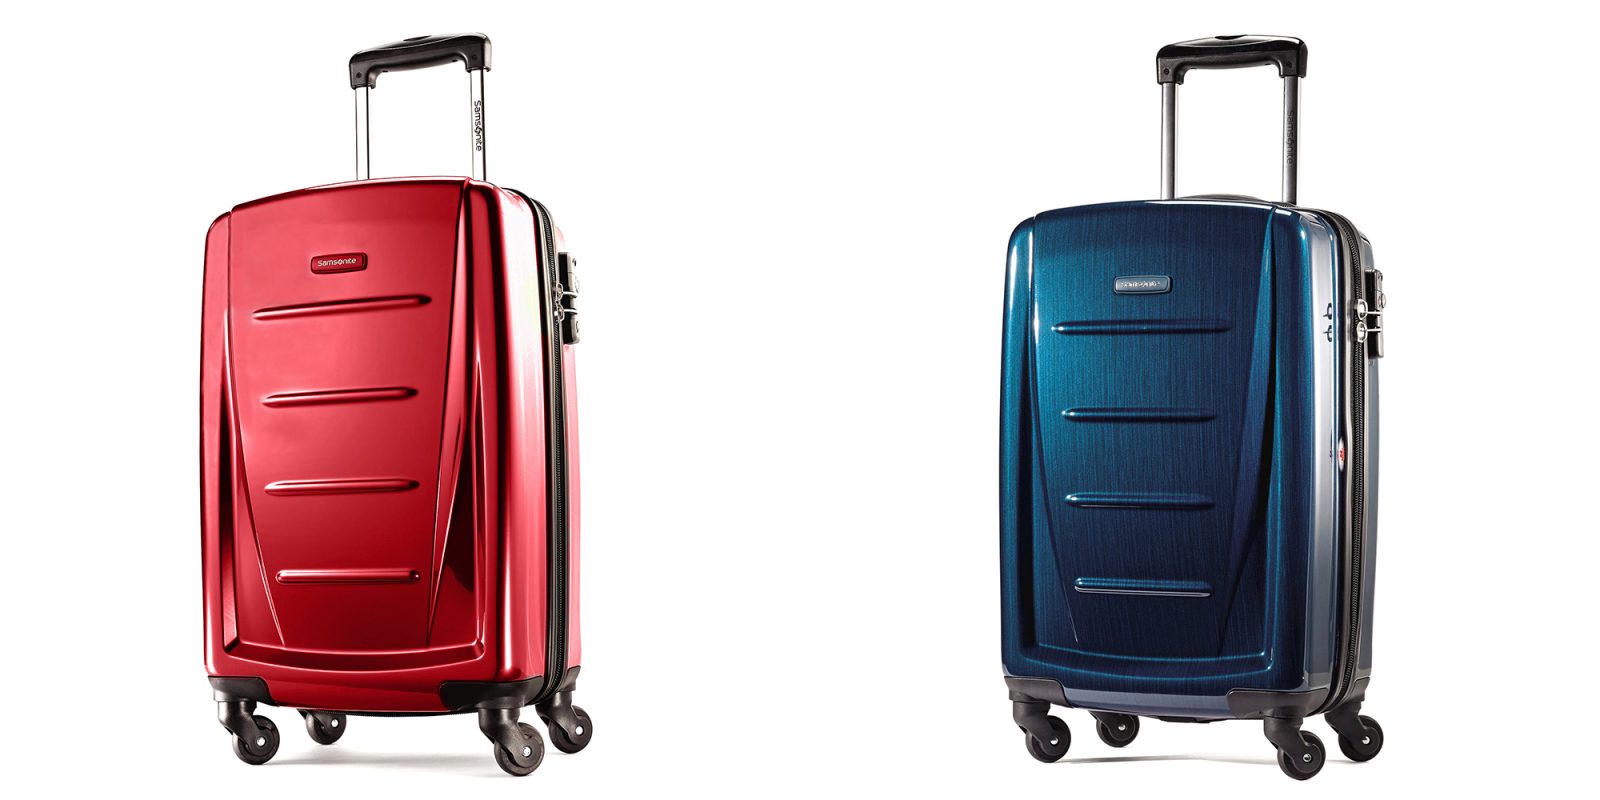 Upgrade to a new Samsonite 24-inch Spinner Suitcase for $70, nearly 50% ...